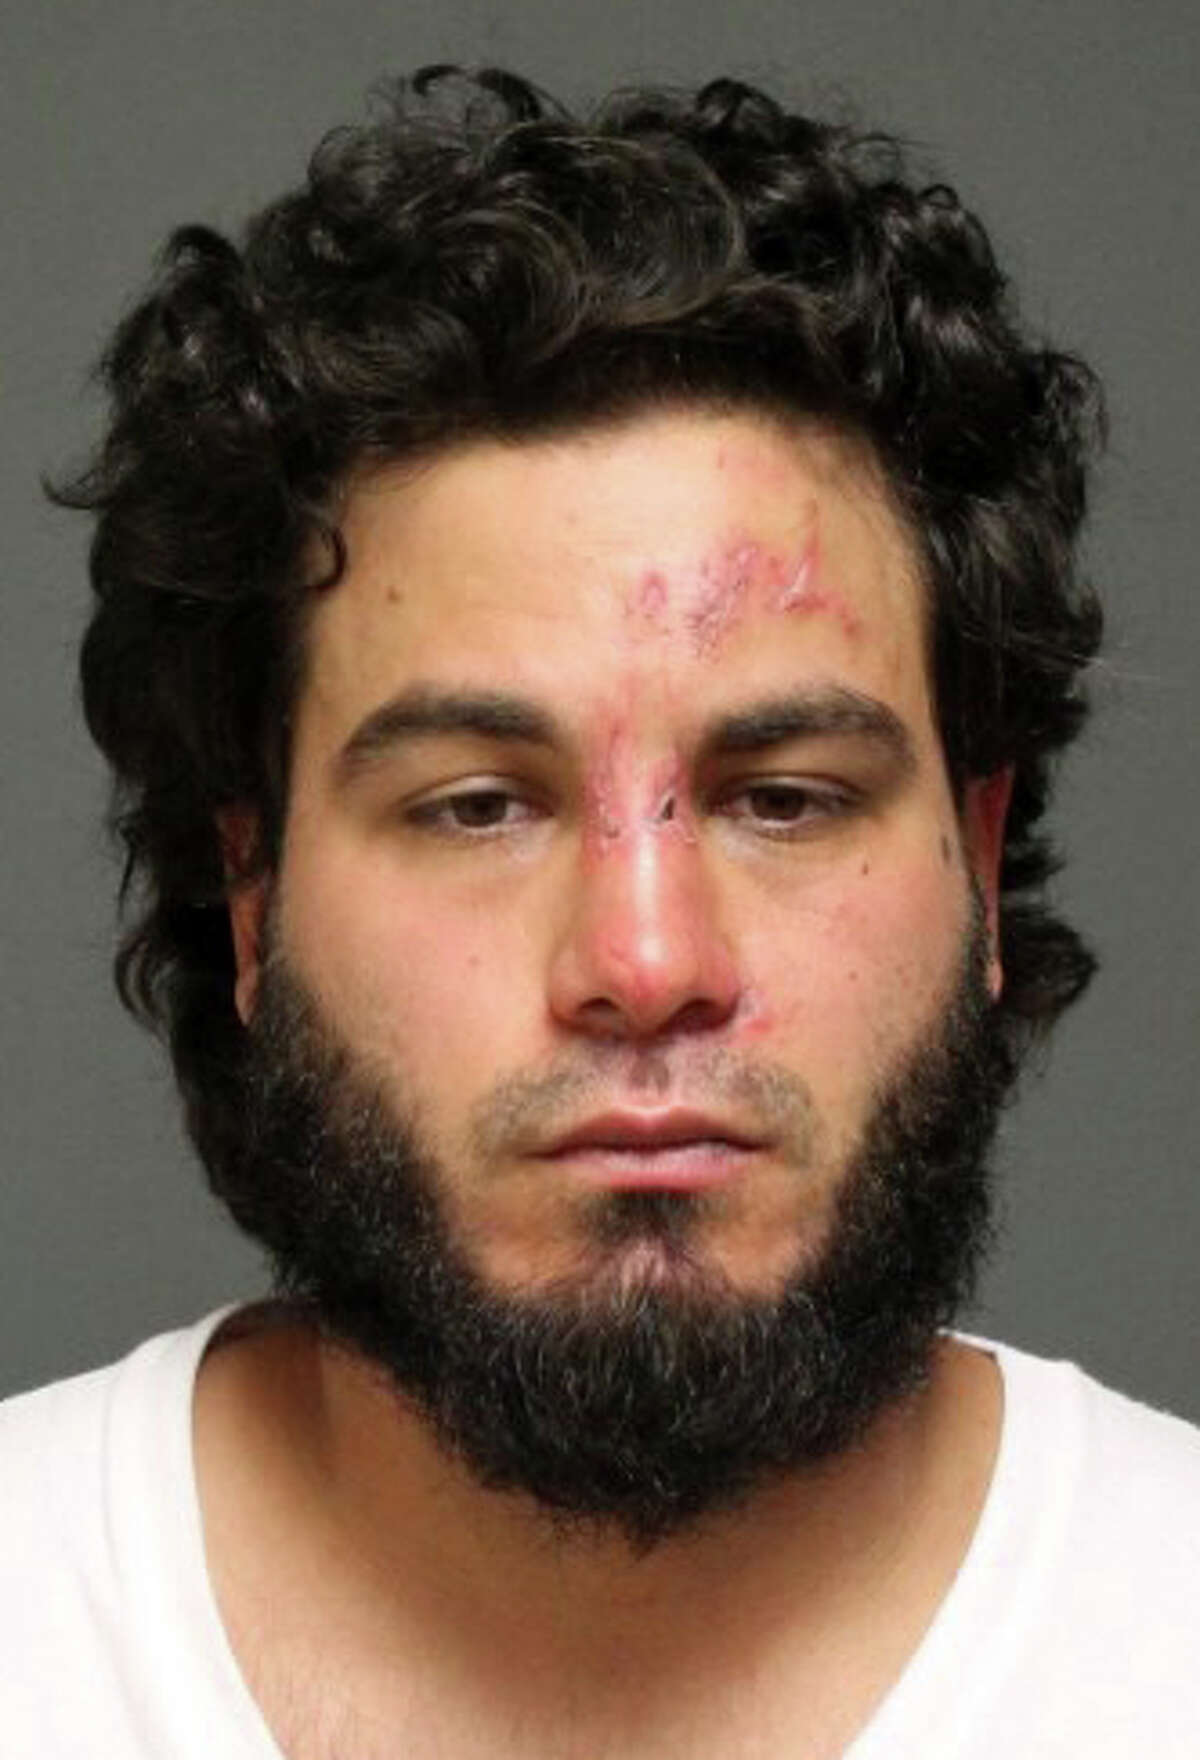 A mugshot of John Rodas from 2015 after he was arrested for second-degree threatening and disorderly conduct in Fairfield. He turned up in Ridgefield naked Sunday morning on Route 7, where he hoped into the bed of a pickup truck. He eventually jumped from the truck as it was moving and sustained life-threatening head injuries. Redding police say the naked man did drugs in his hotel room before taking his clothes off.